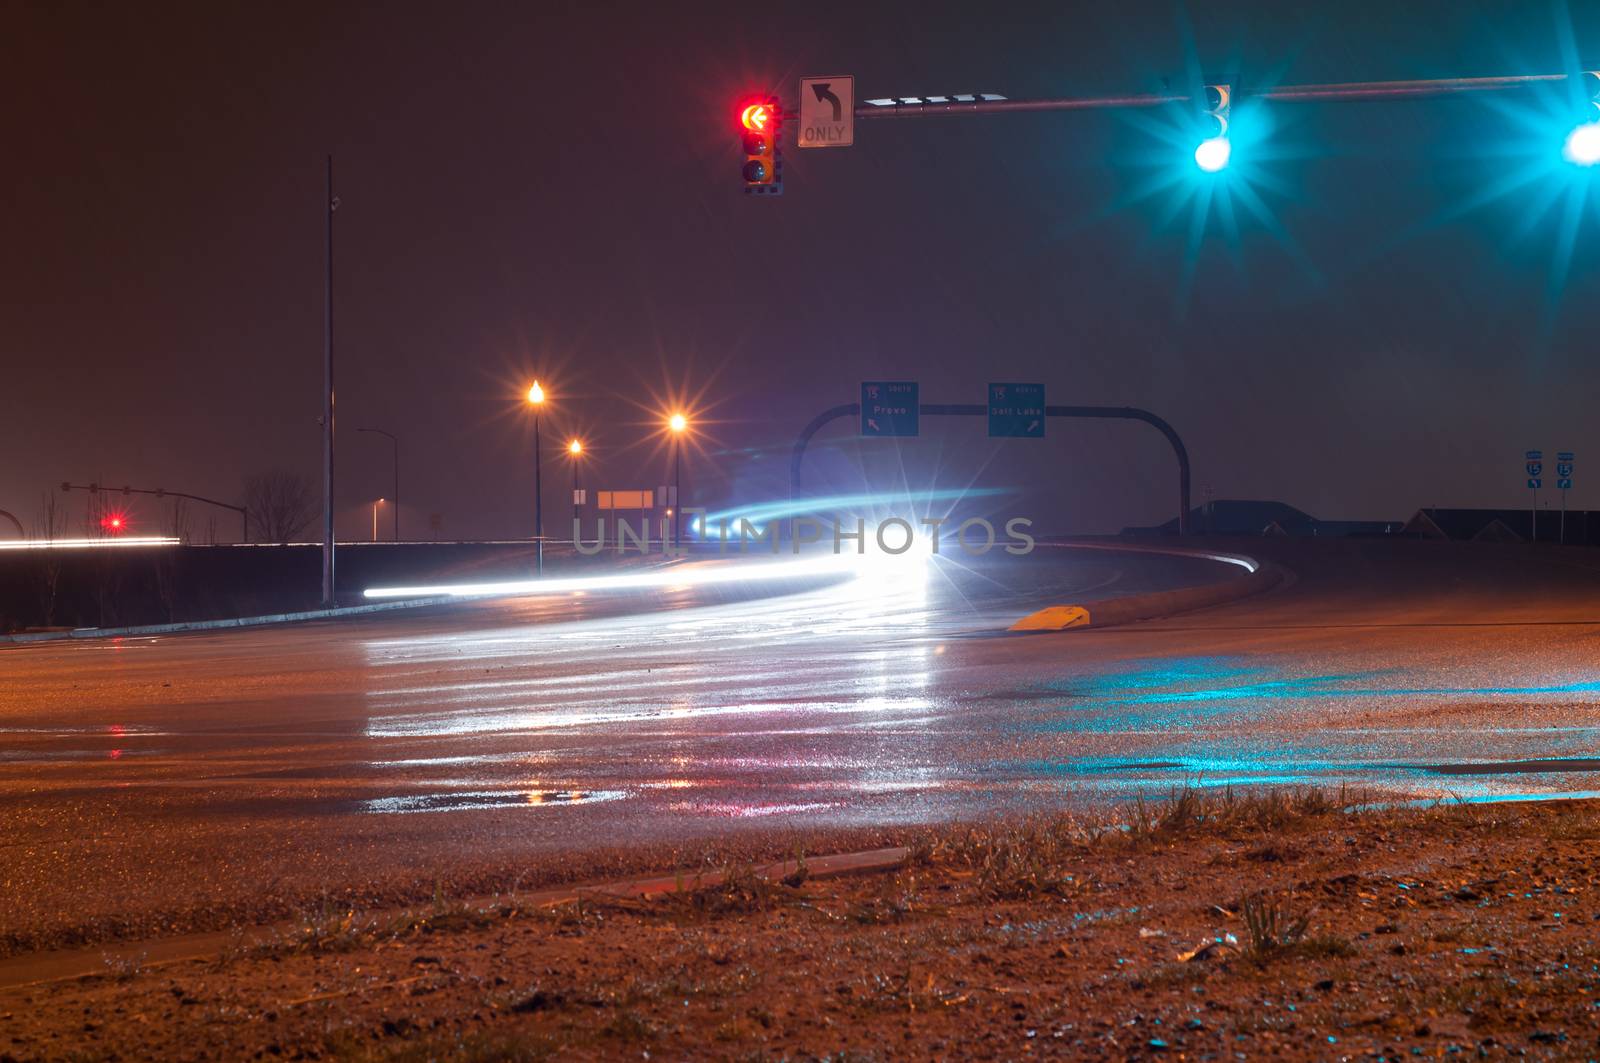 Two Cars creating twisting trails under the stoplight on a rainy night